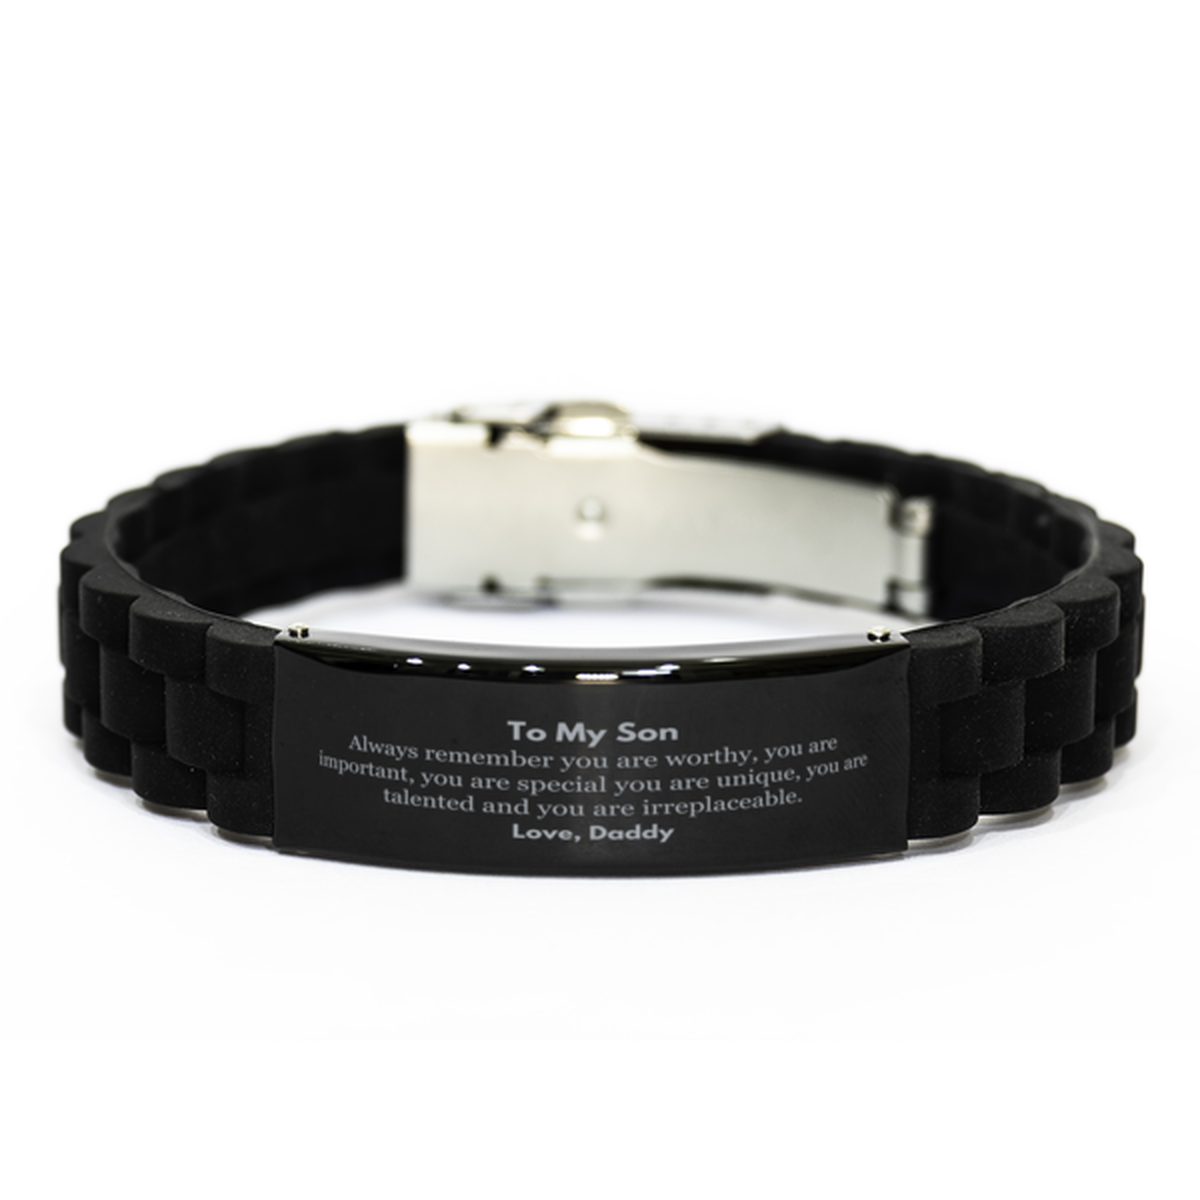 Son Birthday Gifts from Daddy, Inspirational Black Glidelock Clasp Bracelet for Son Christmas Graduation Gifts for Son Always remember you are worthy, you are important. Love, Daddy